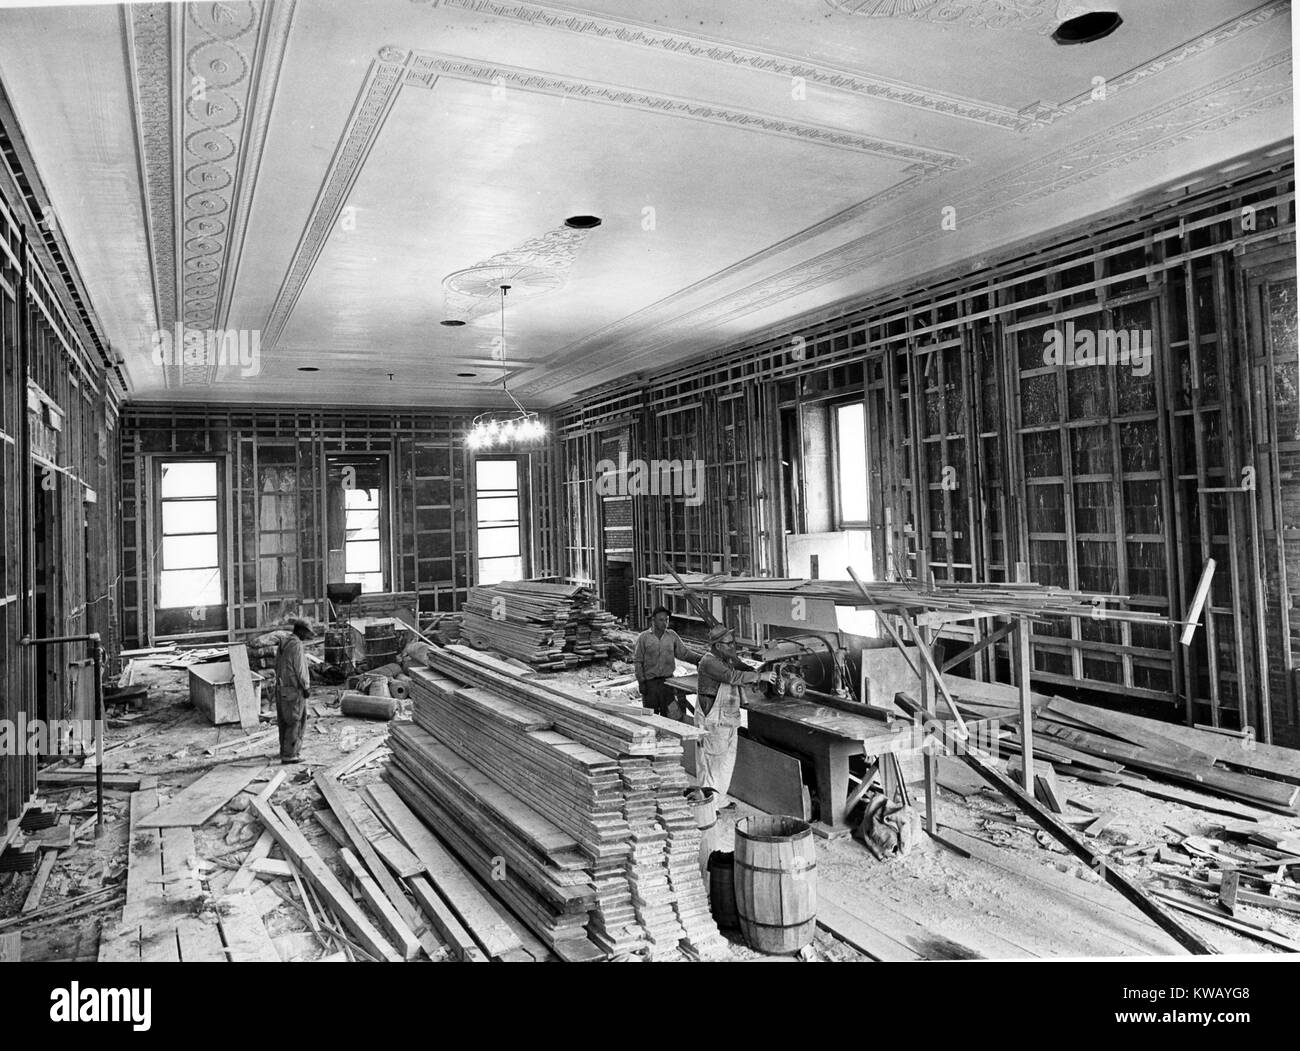 Northeast view in the East Room during the Renovation of the White House, Washington, D.C, June 21, 1951. Stock Photo